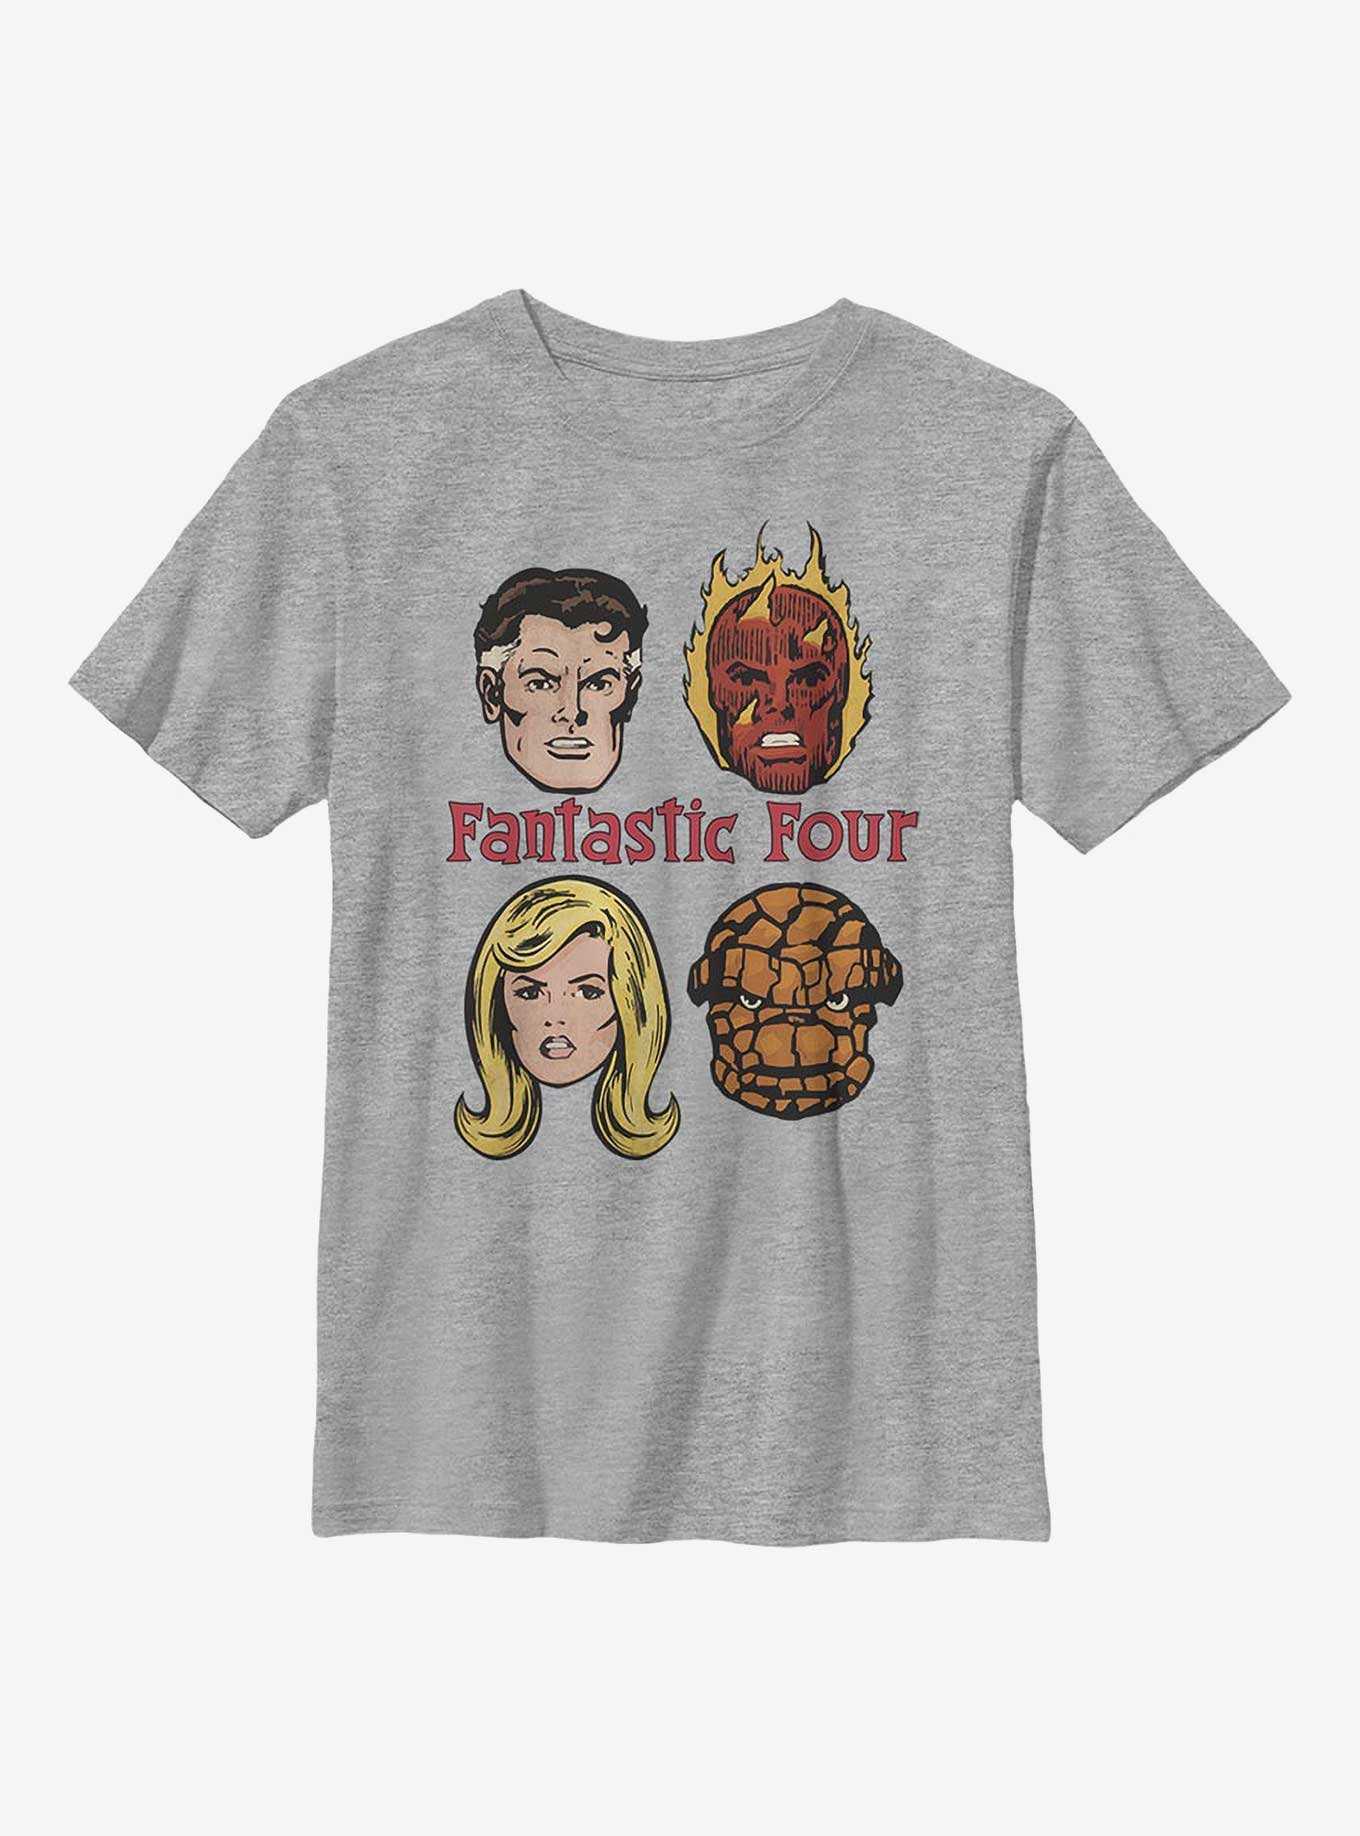 BoxLunch OFFICIAL Shirts and Gifts | Merch Four Fantastic